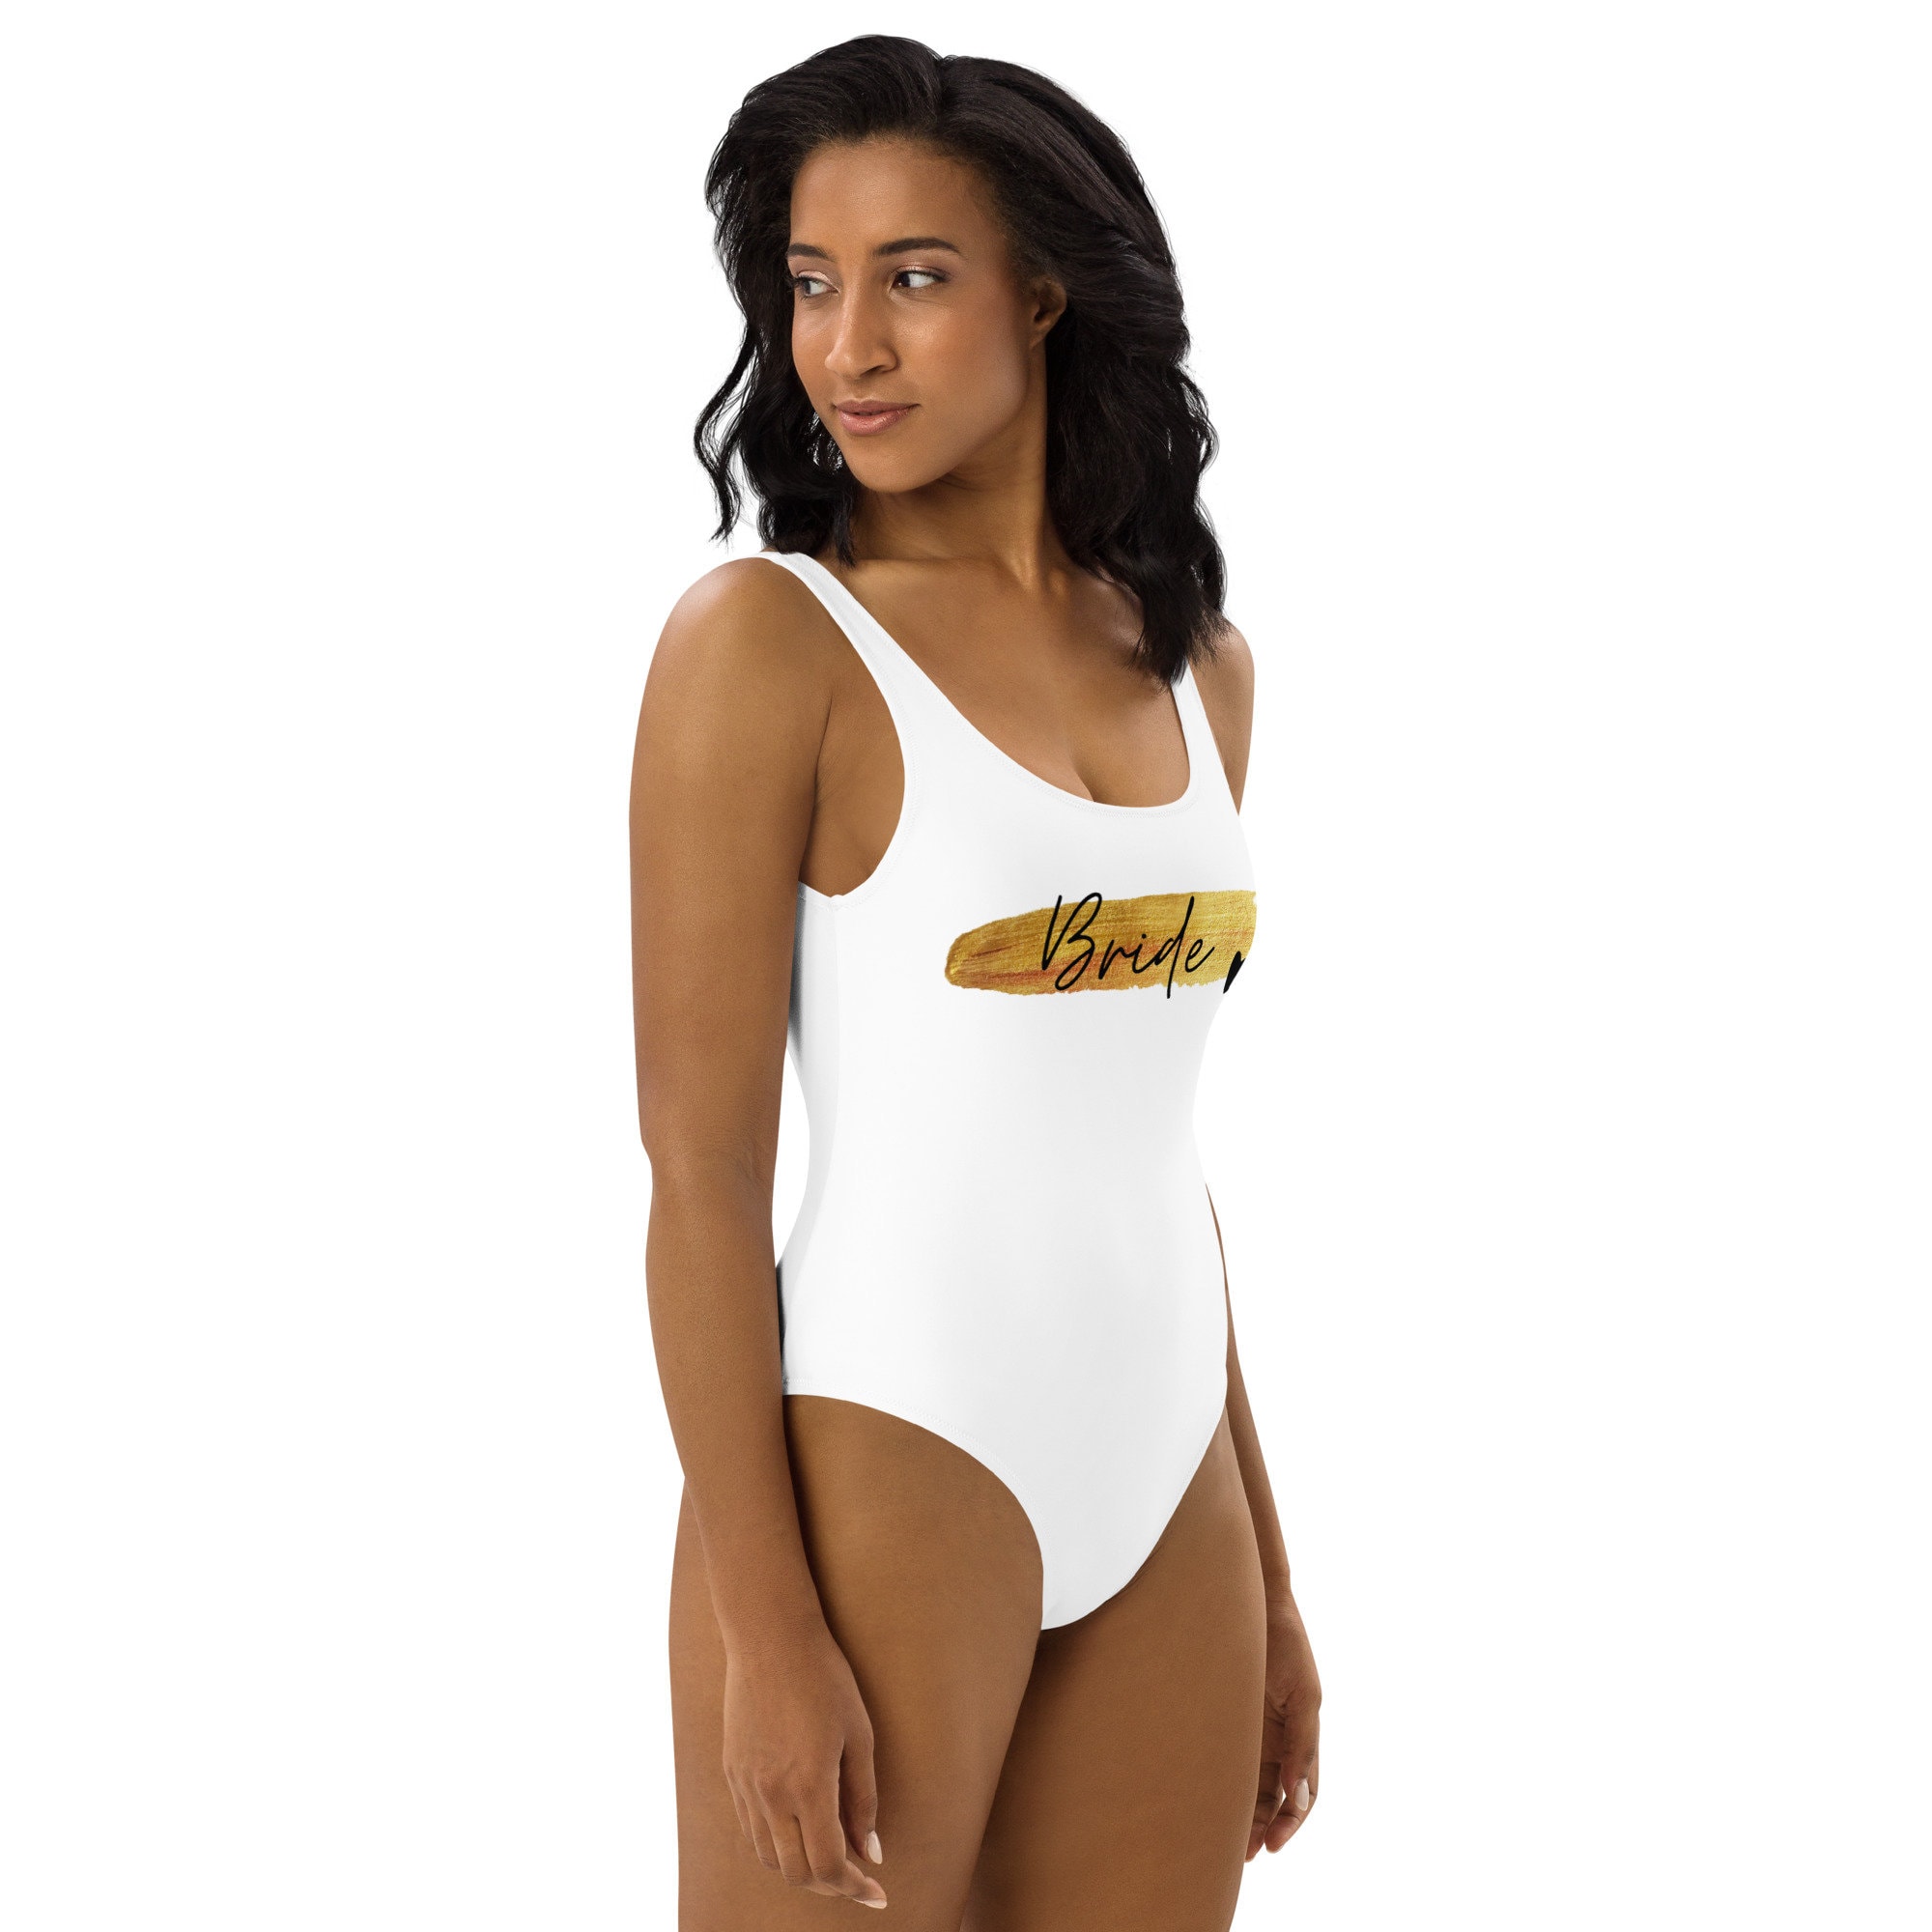 Hotwife One-piece Swimsuit, Gold Hotwife Word Cloud on Black